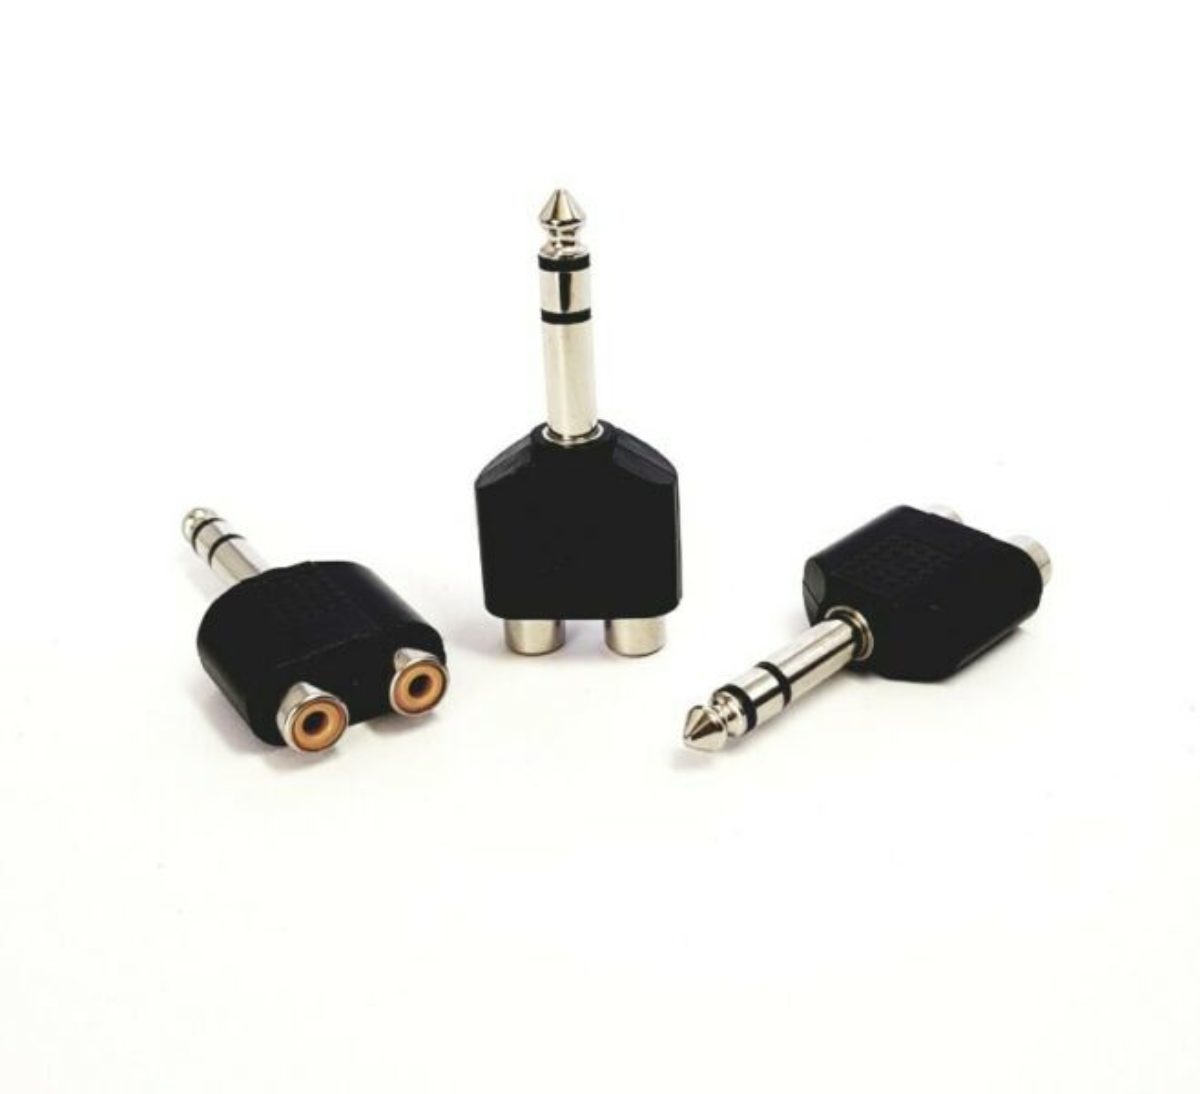 2pcs Jack Adapter Jack Plug 6.35 Mm - Jack Socket 3.5 Mm in Gbagada -  Accessories & Supplies for Electronics, Marvin Empire